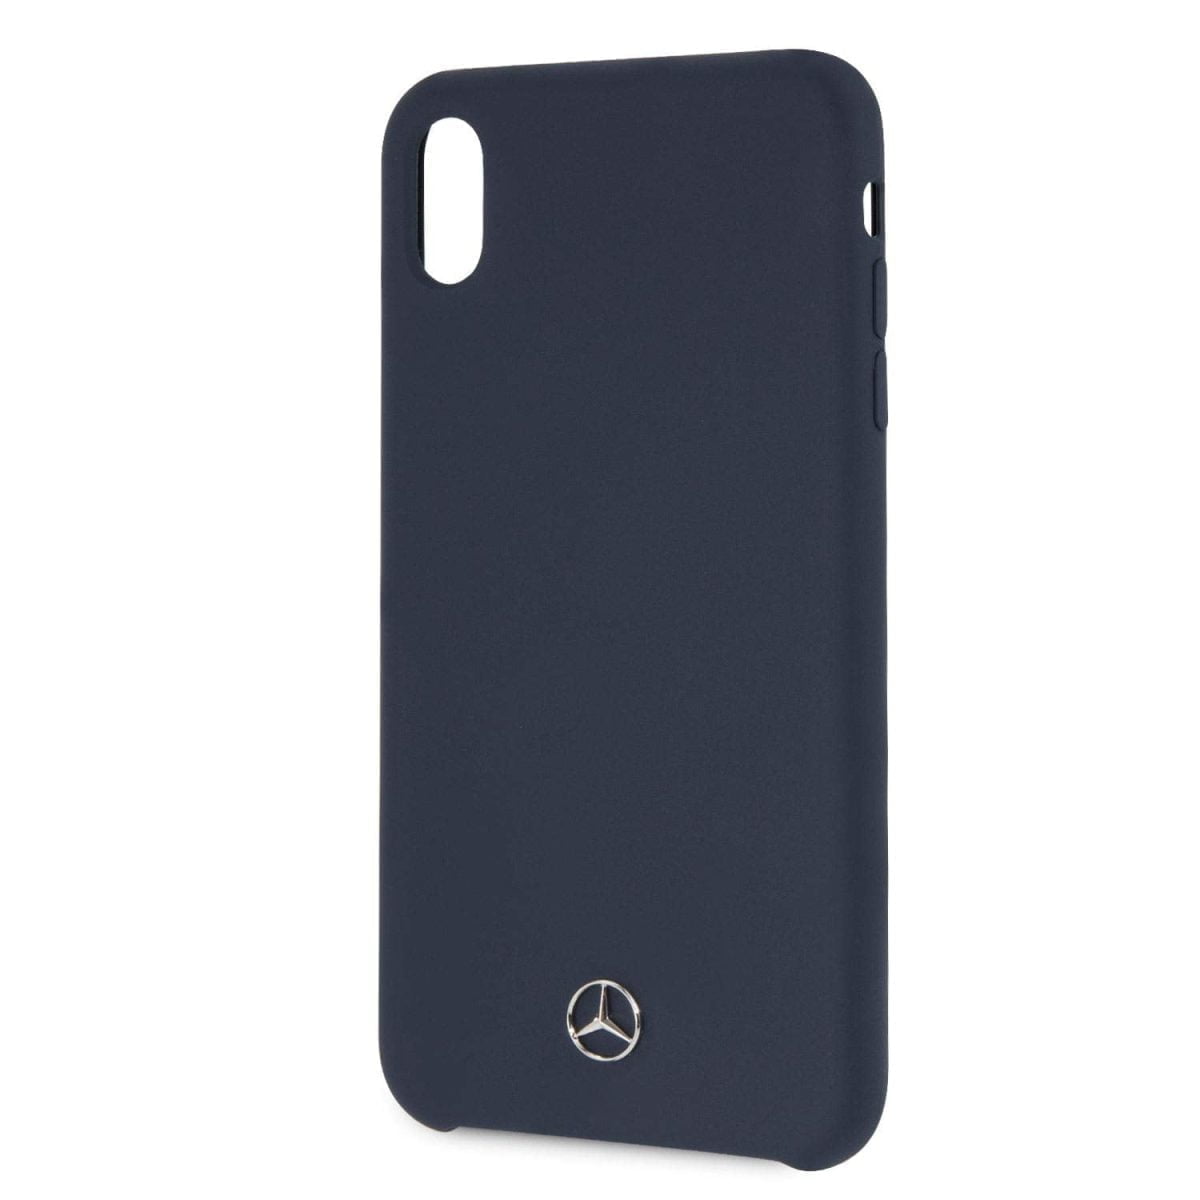 Mercedes Benz Iphone Xs Max Liquid Silicon Silcon Case With Microfiber Lining Navy 03 This Hard Silicone Soft Case With A Sculpted Metallic Mercedes Benz Logo For A 3D Effect Gives You A Classic And Elegant Appeal To Your Handheld Device It Has Easy Accessibility For All Ports And Buttons. Case Compatible With Wireless Chargers. Soft Microfiber Interior, Easy To Hold &Amp; Easy Snap-On Design Makes It Fast And Easy To Install Or Take Off In Seconds This Case Provides Both The Ultimate Luxury Experience And Protection From Scratches And Abrasions By Slightly Raised Edges Iphone Case Iphone Xs Liquid Silicon Case With Microfiber Lining (Navy Blue) Mercedes-Benz